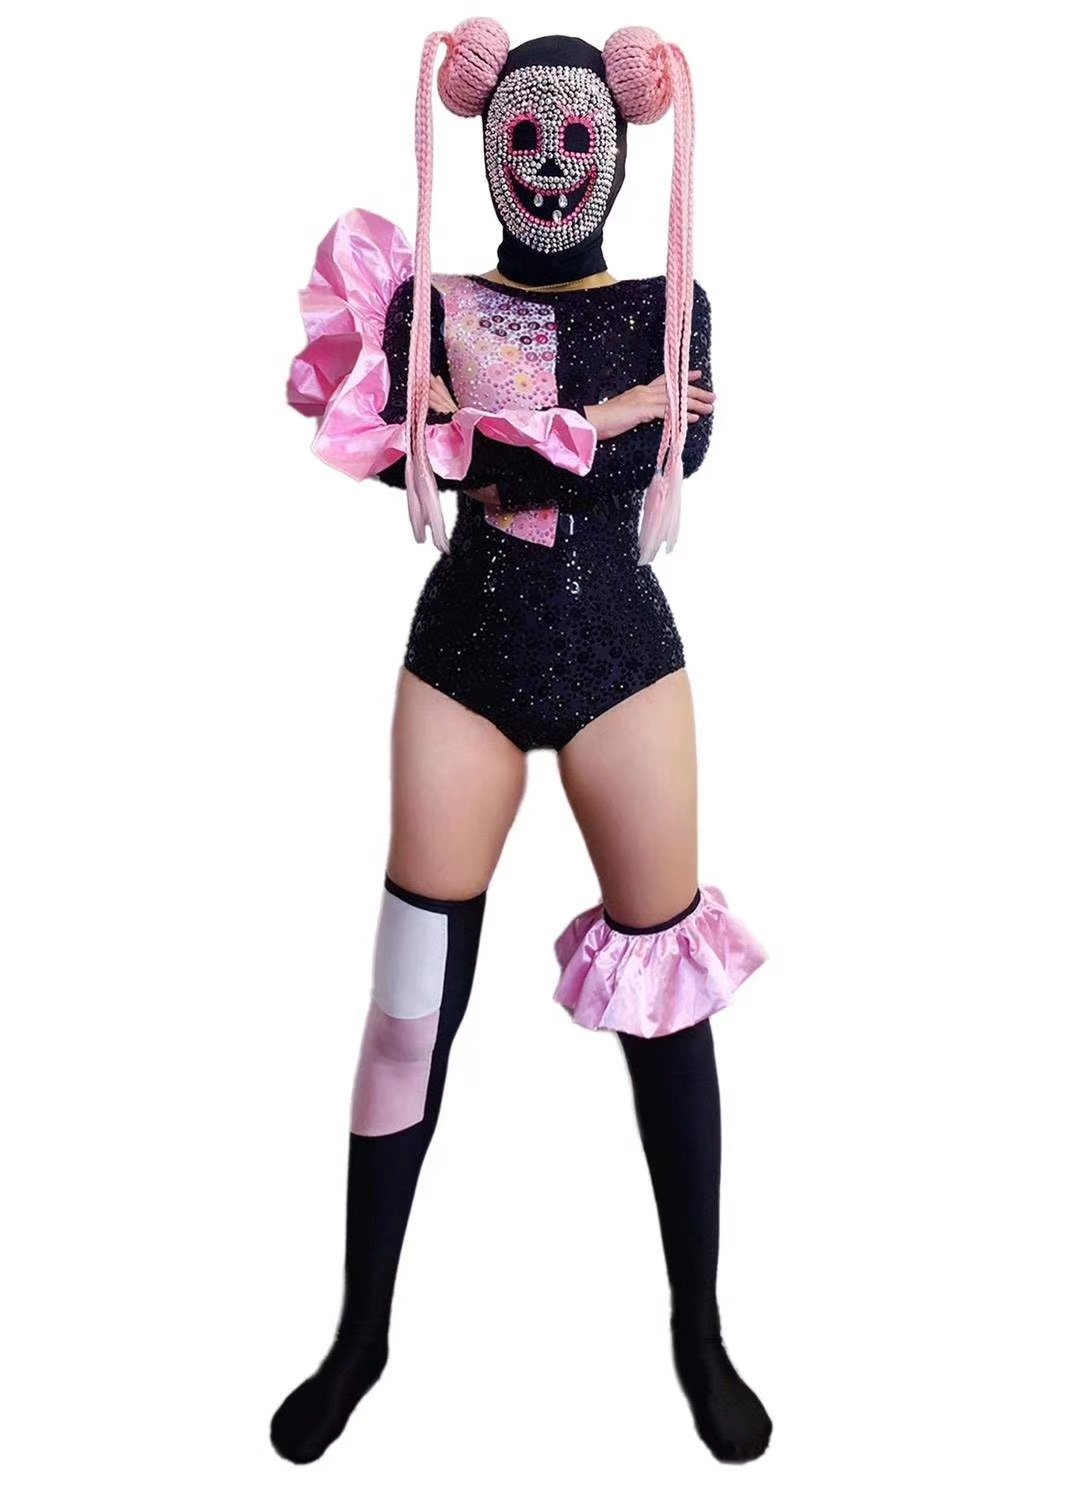 Crazy Pink Hallow will NOT arrive in time for Halloween